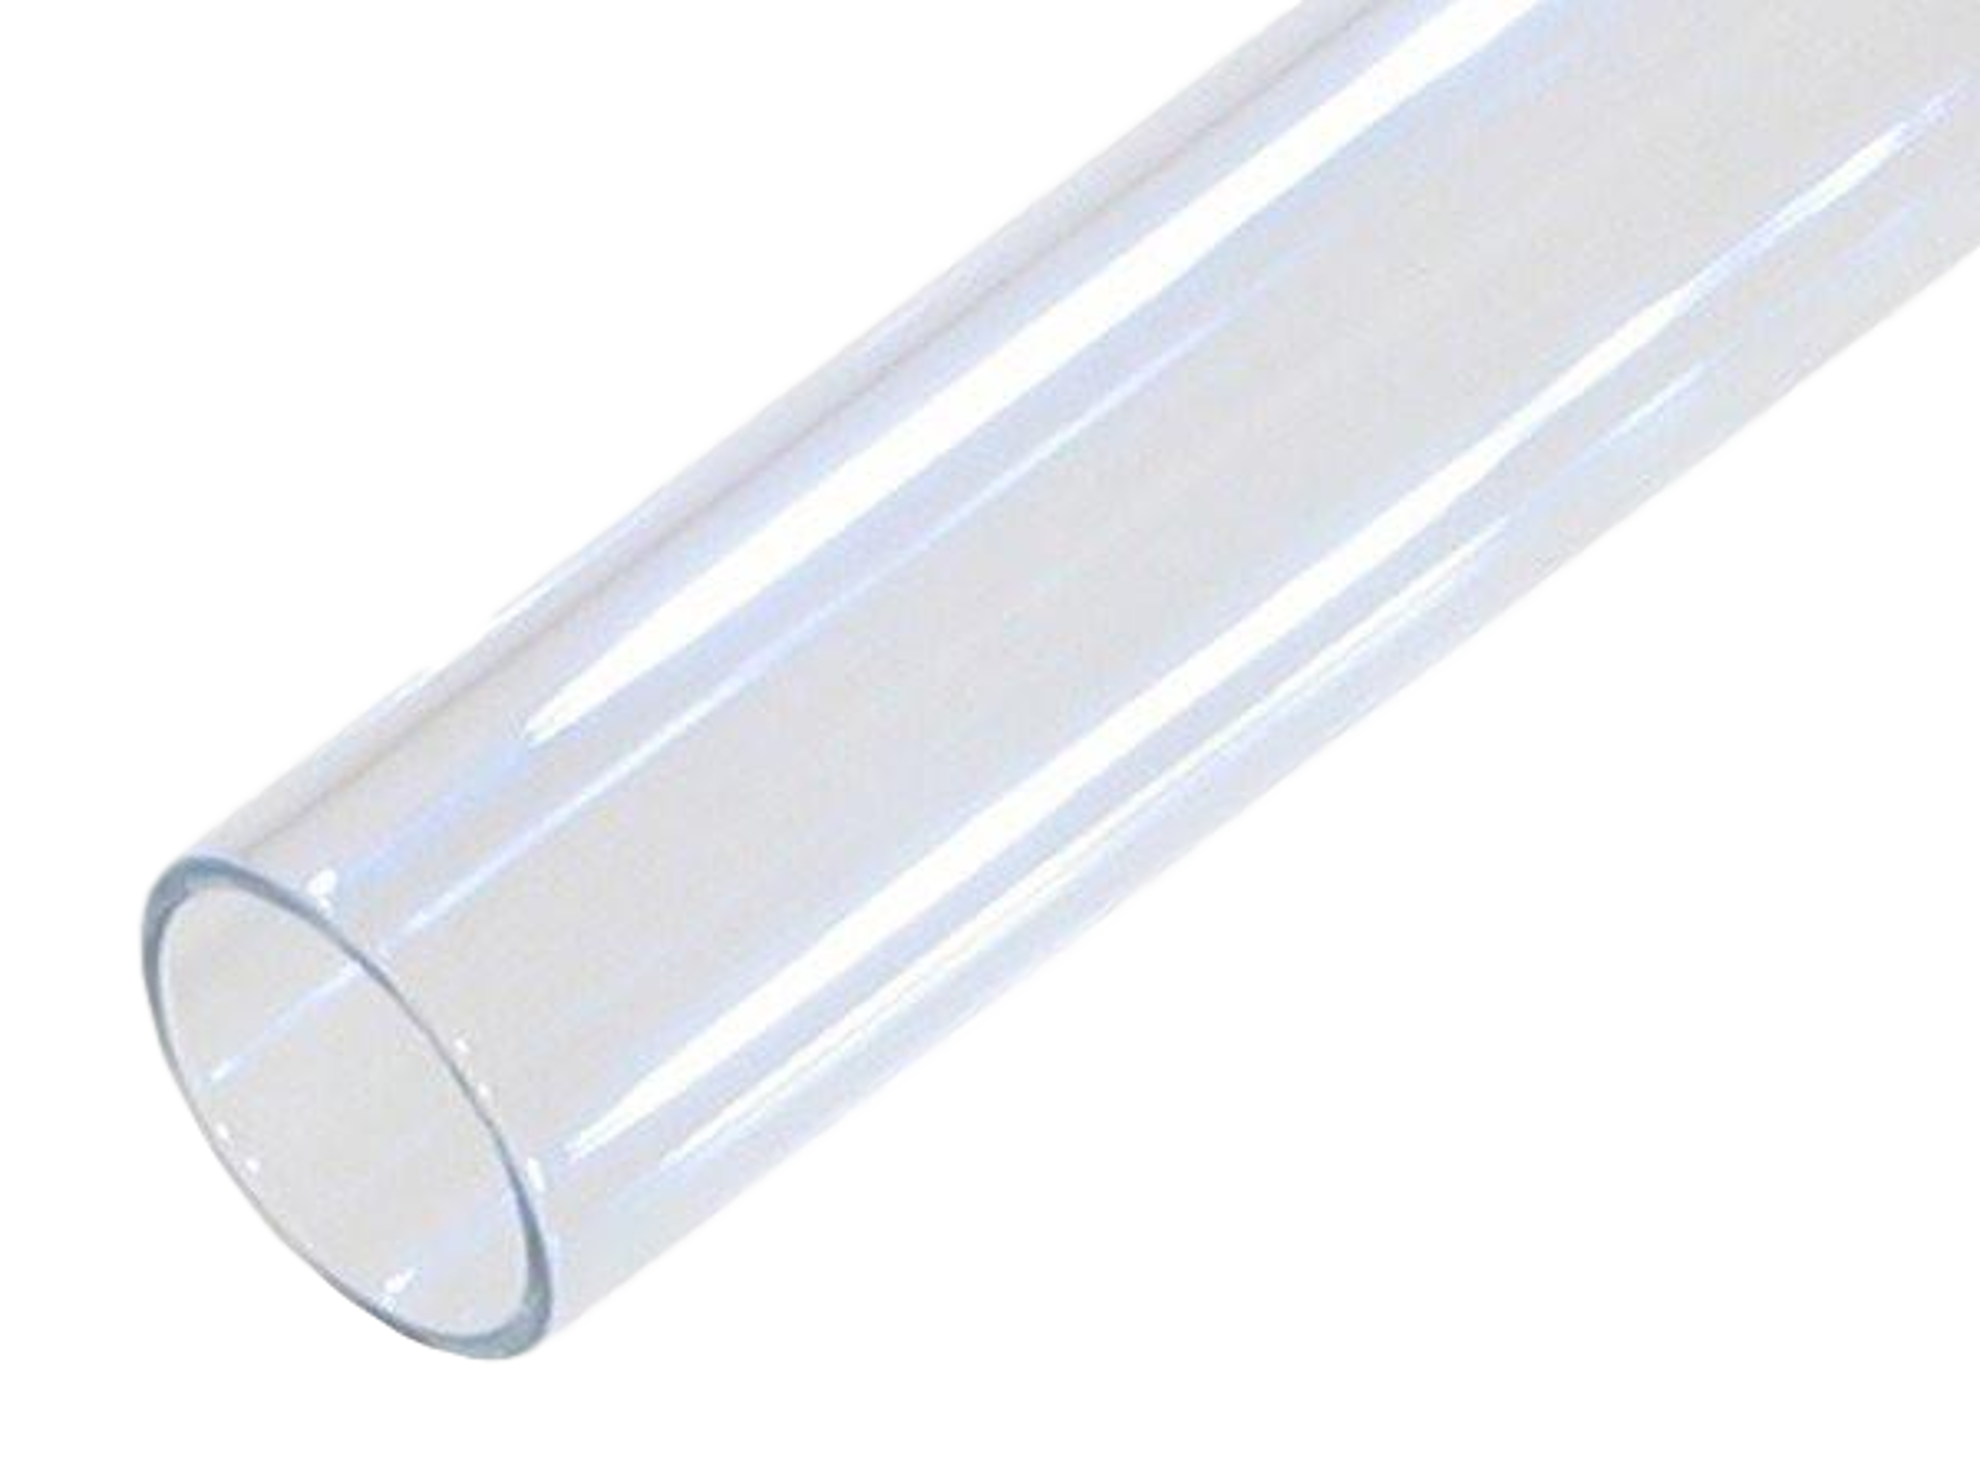 Glass Sleeve Double Open Ended 890 mm long (High Output)